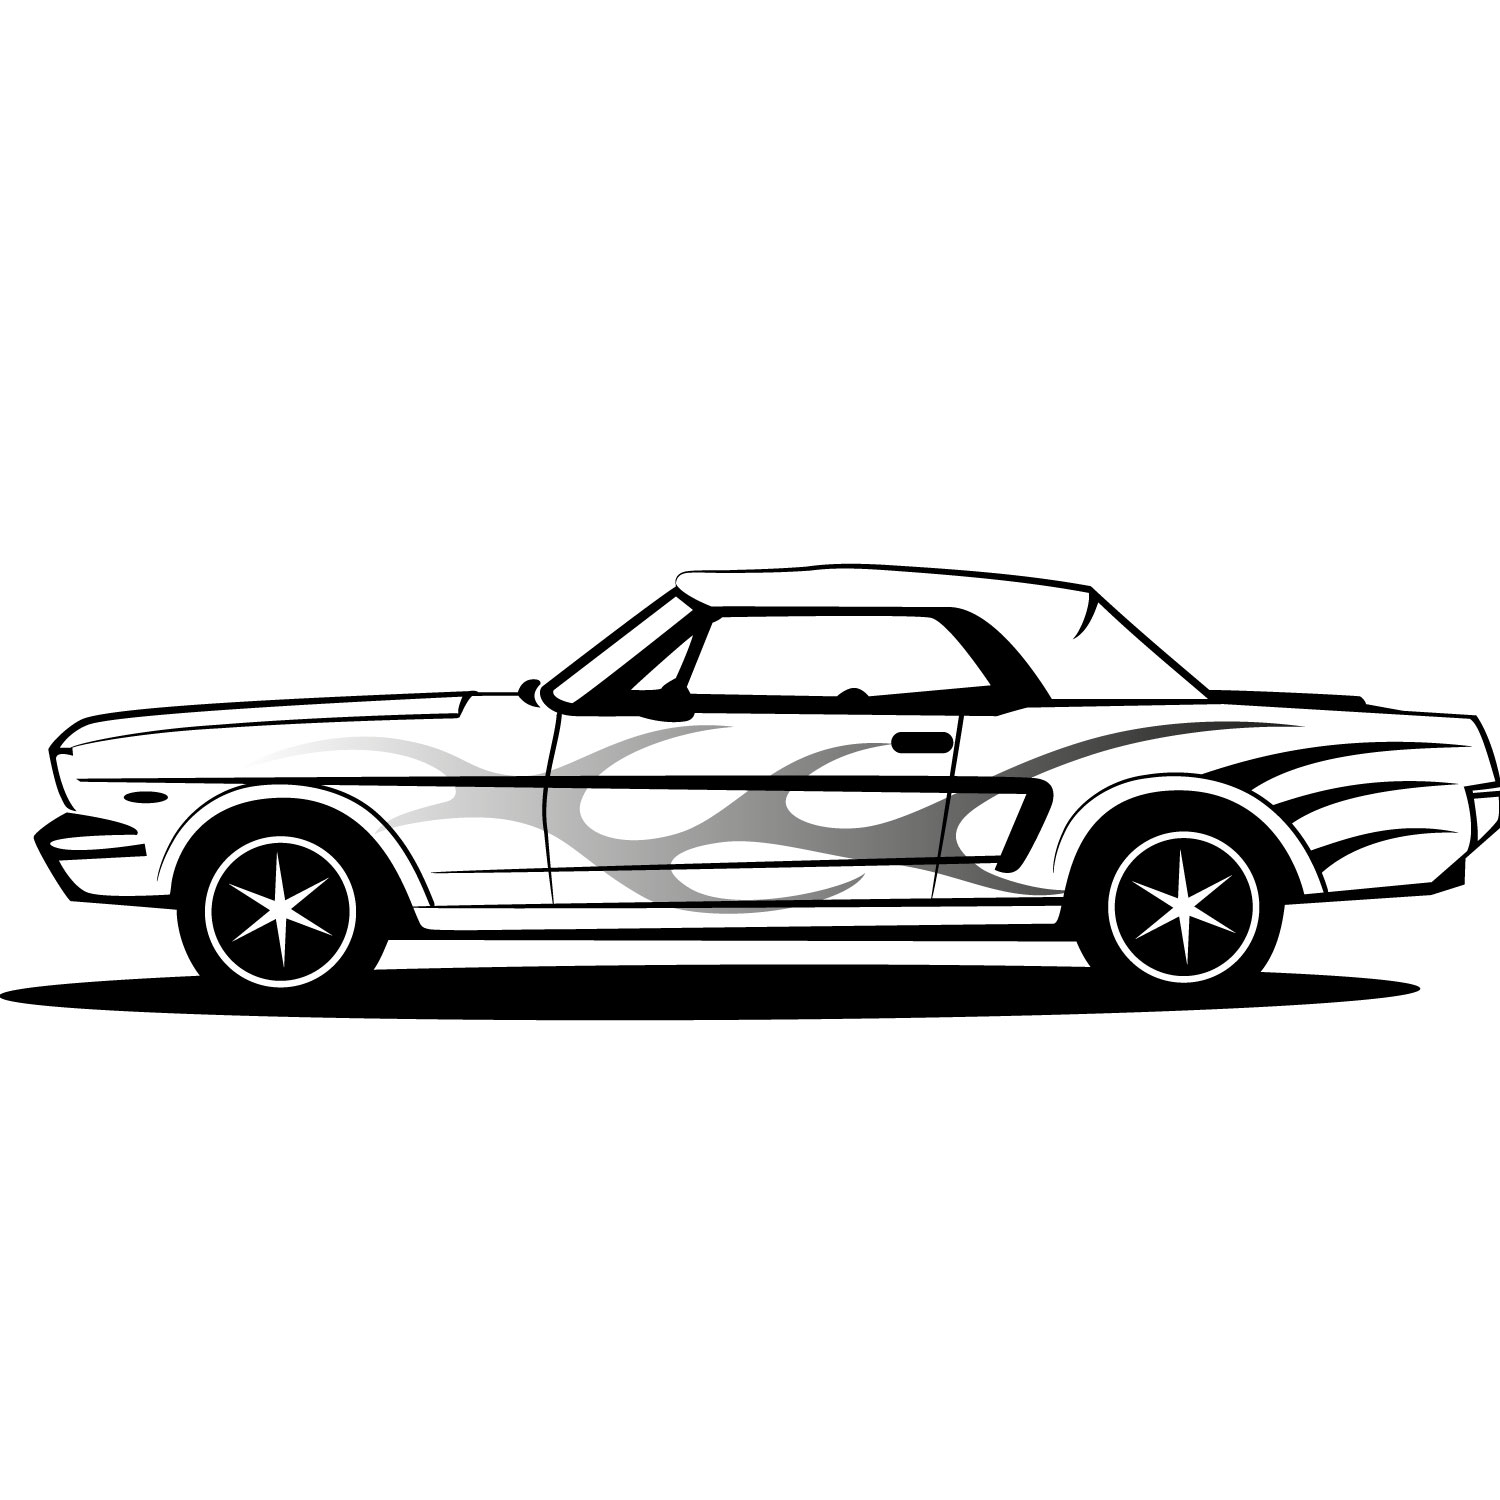 Mustang car clipart free